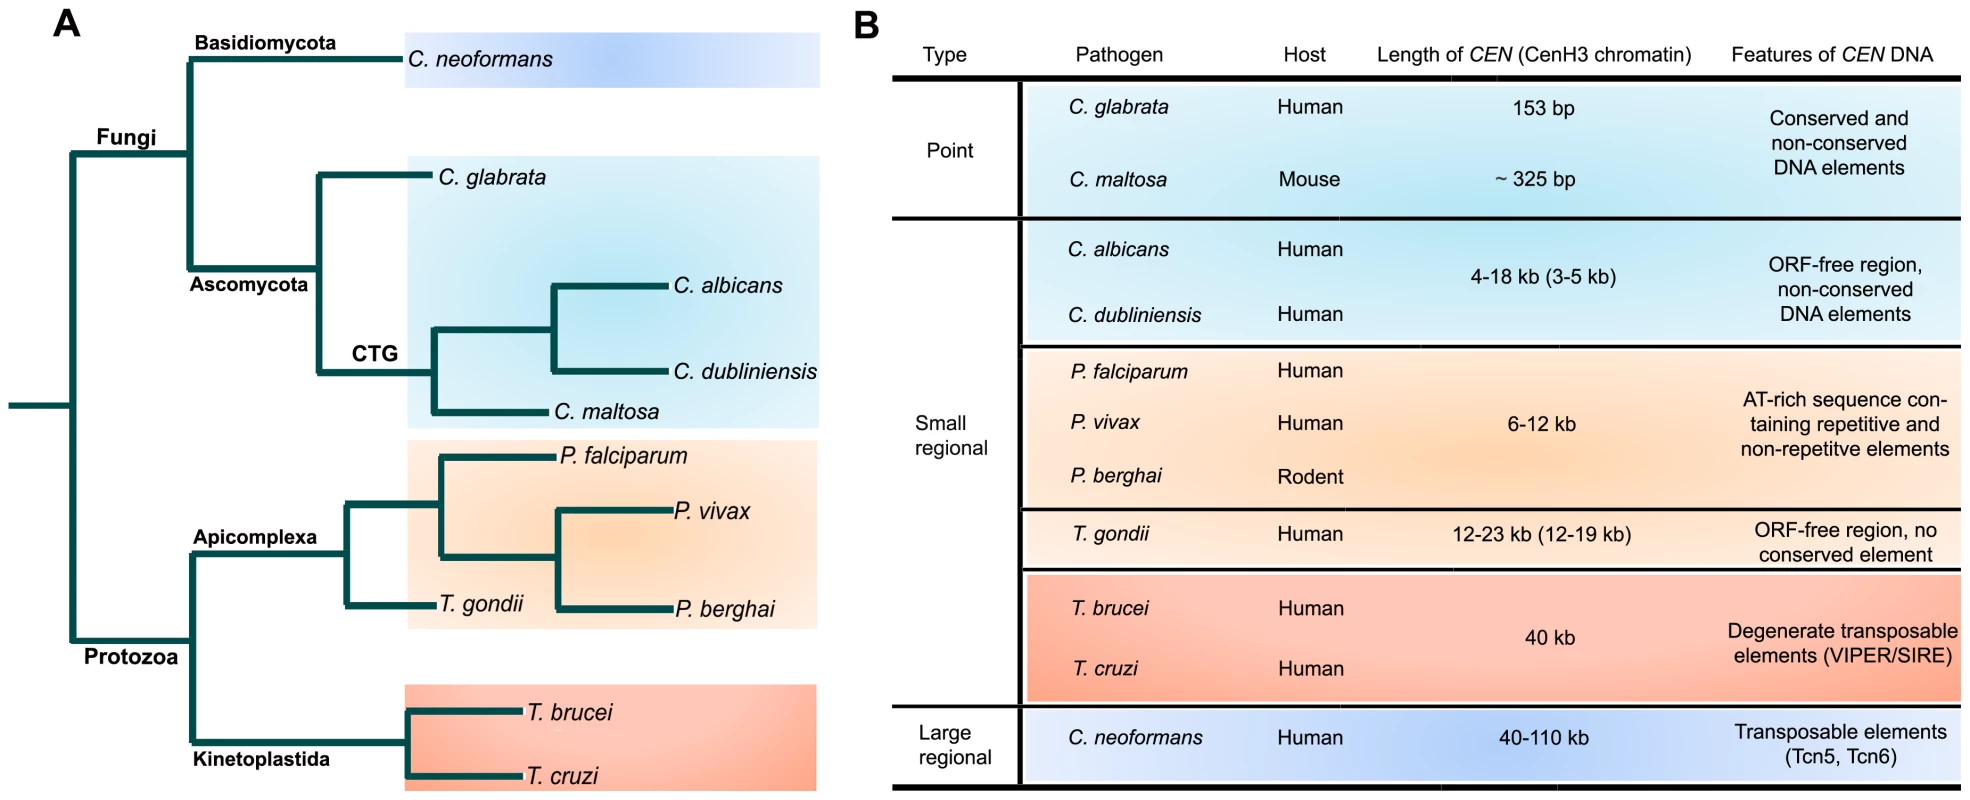 Structural organization of centromeres in various microbial pathogens.